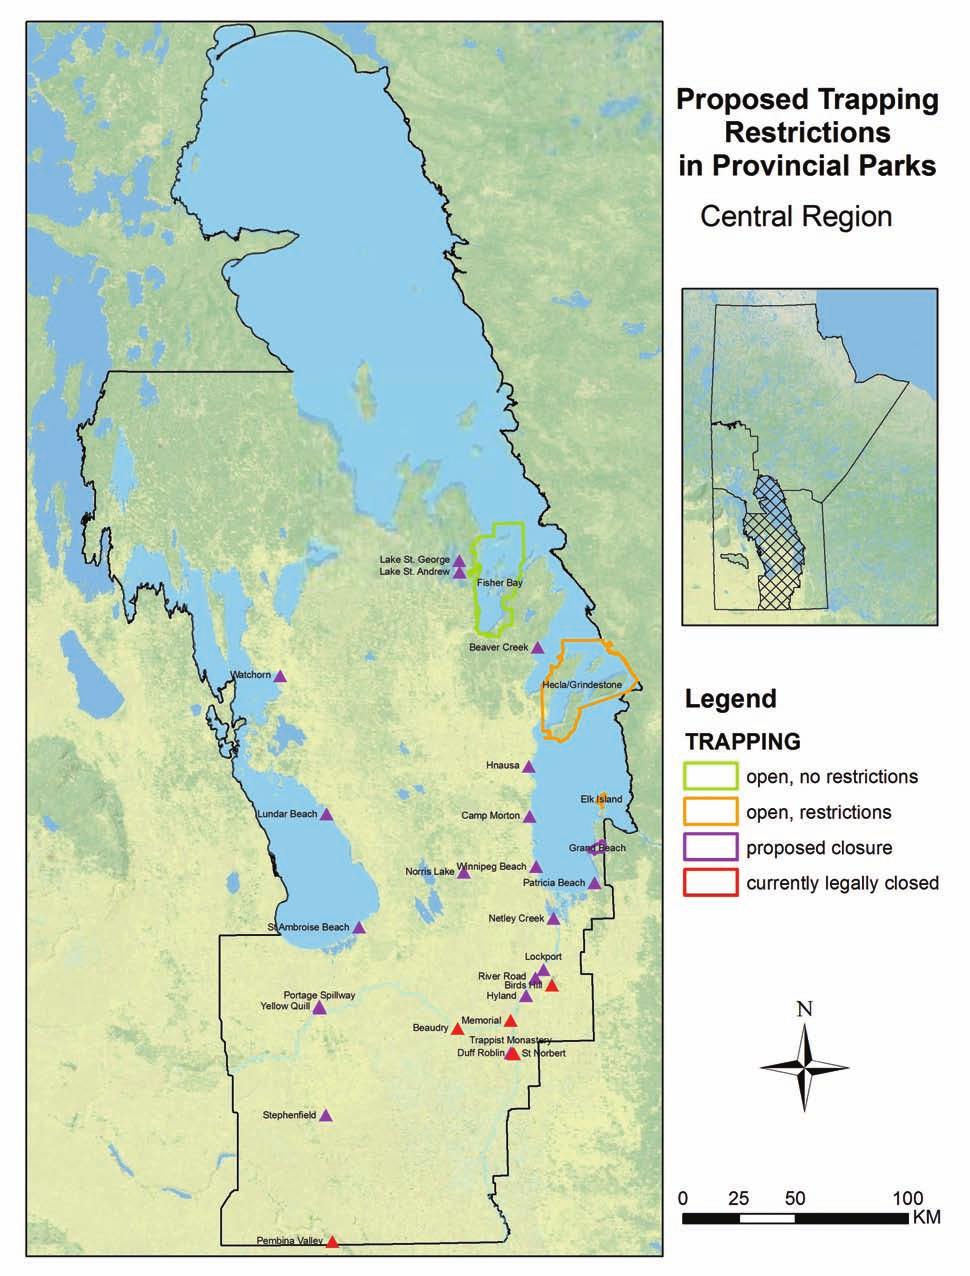 Proposed Trapping Restrictions in Provincial Parks CENTRAL